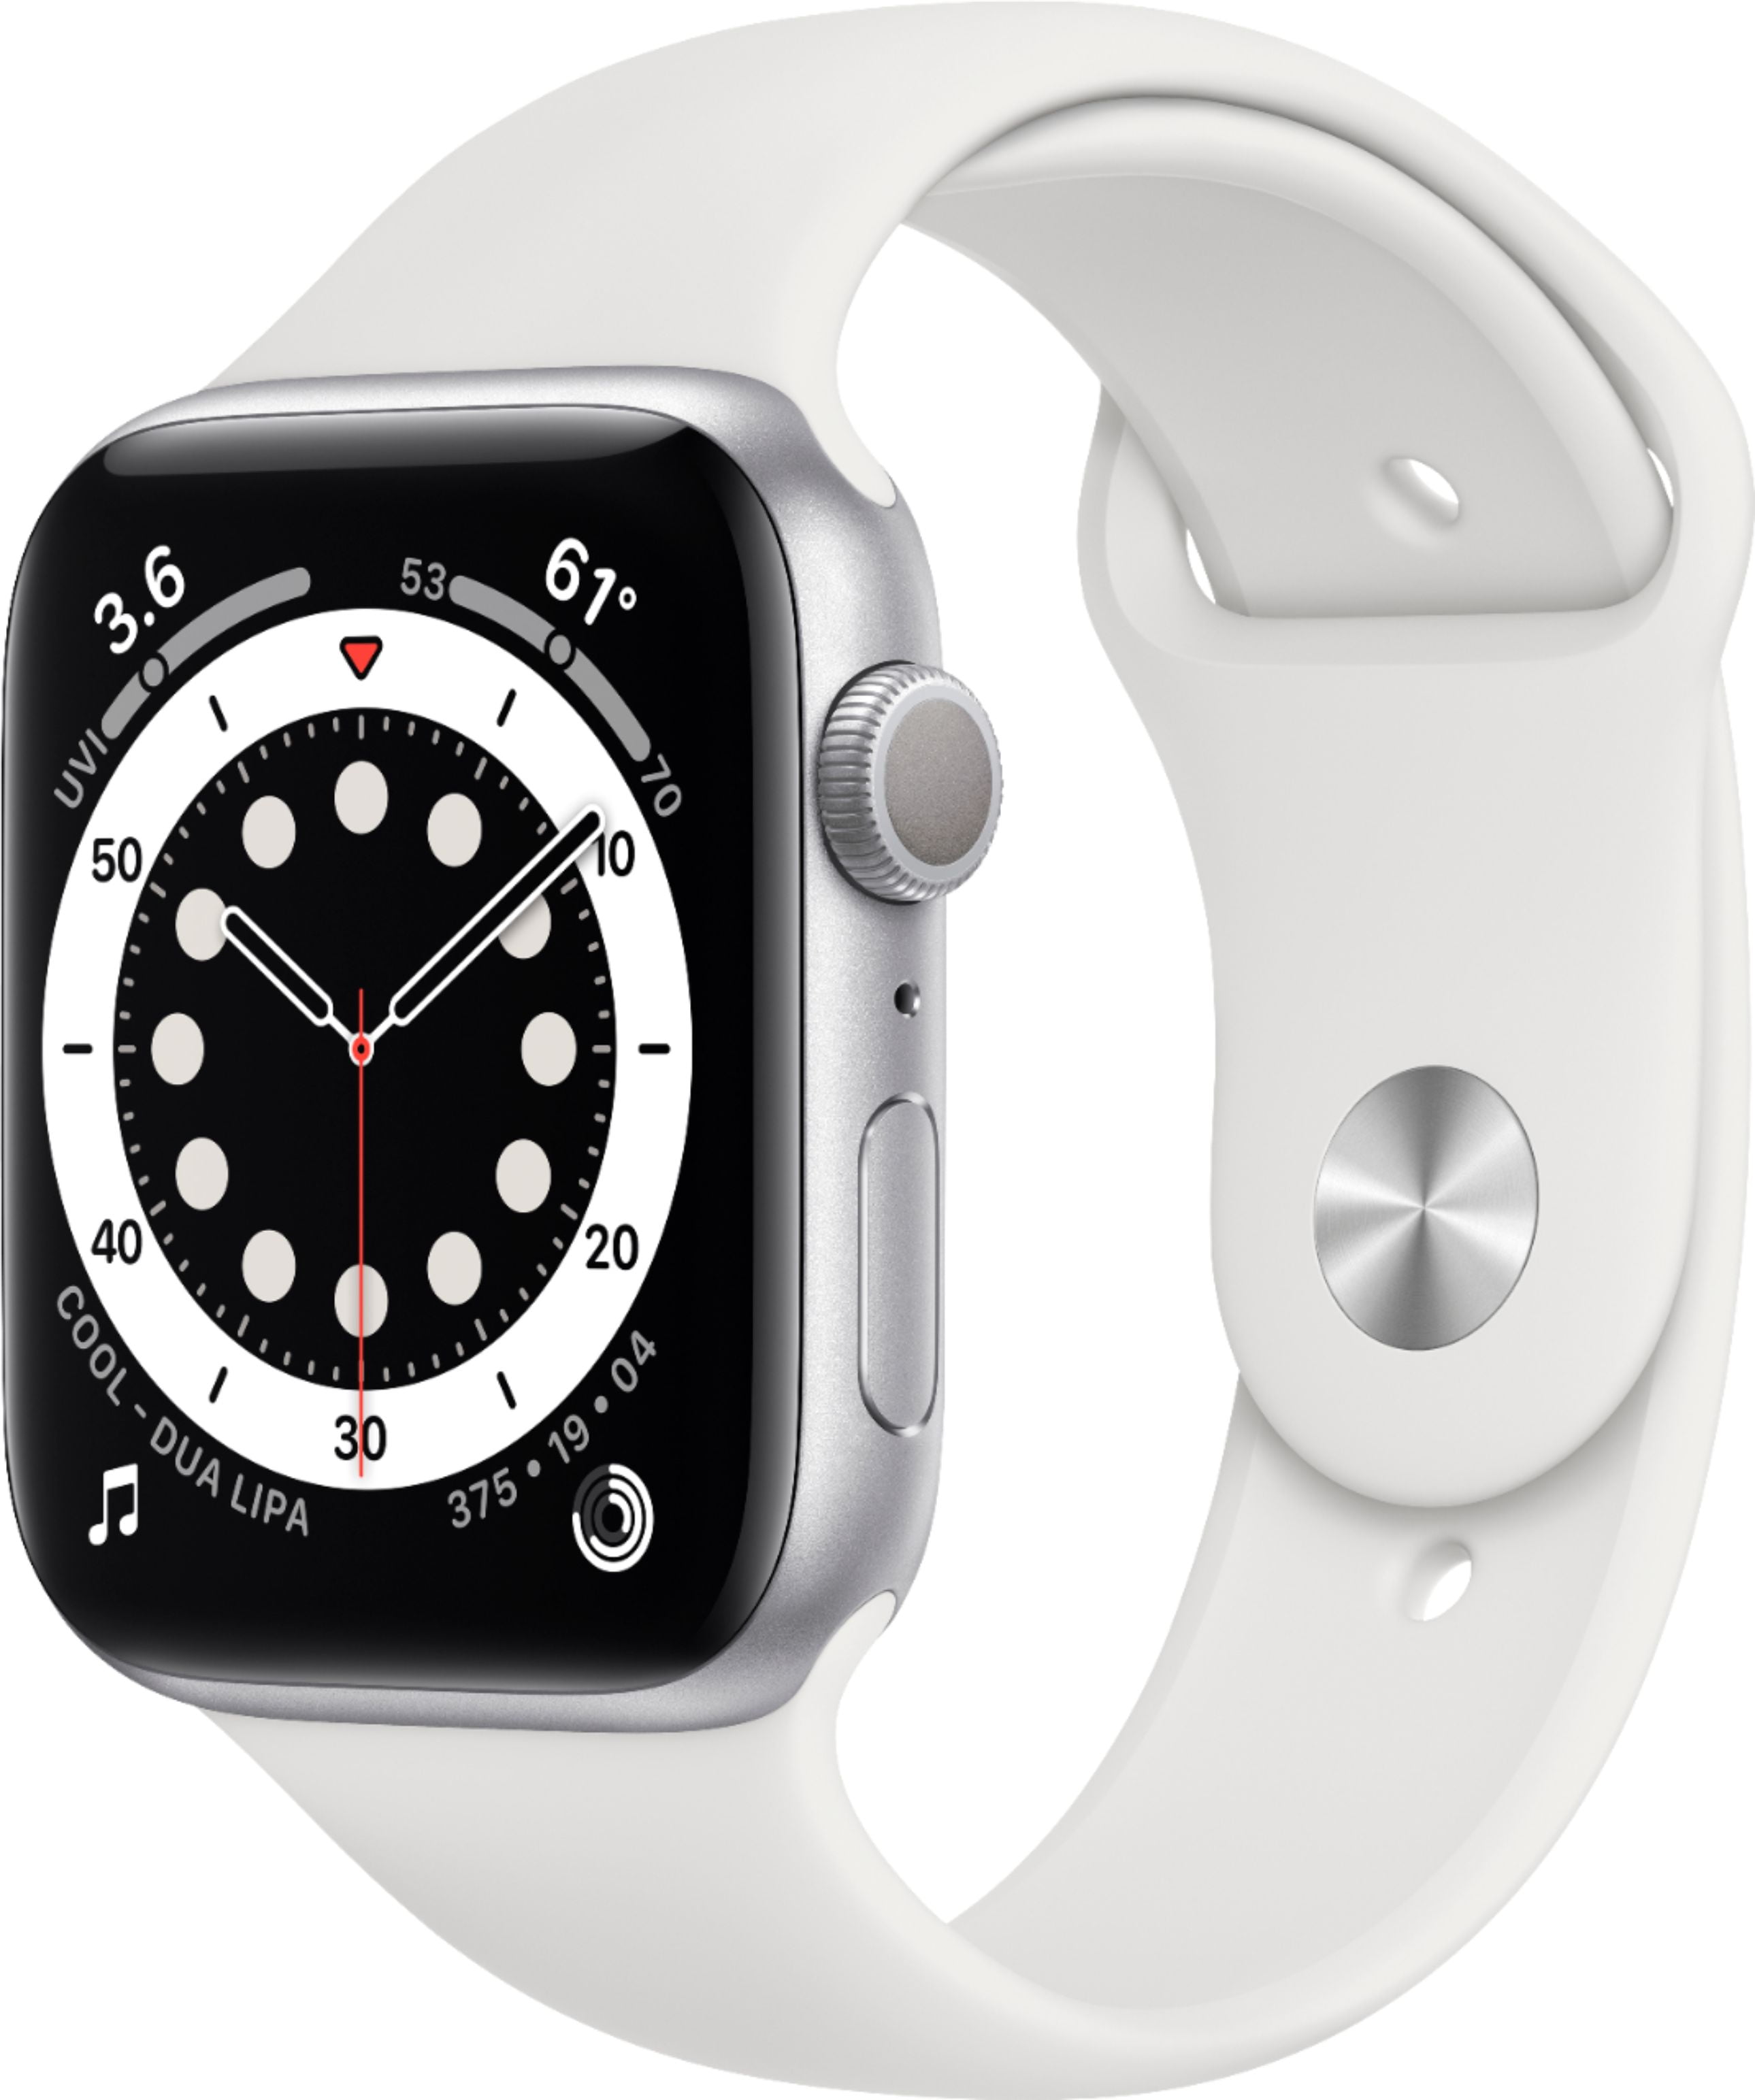 Watery Wrap team Apple Watch Series 6 GPS, 44mm Silver Aluminum Case with White Sport Band -  Regular - Walmart.com